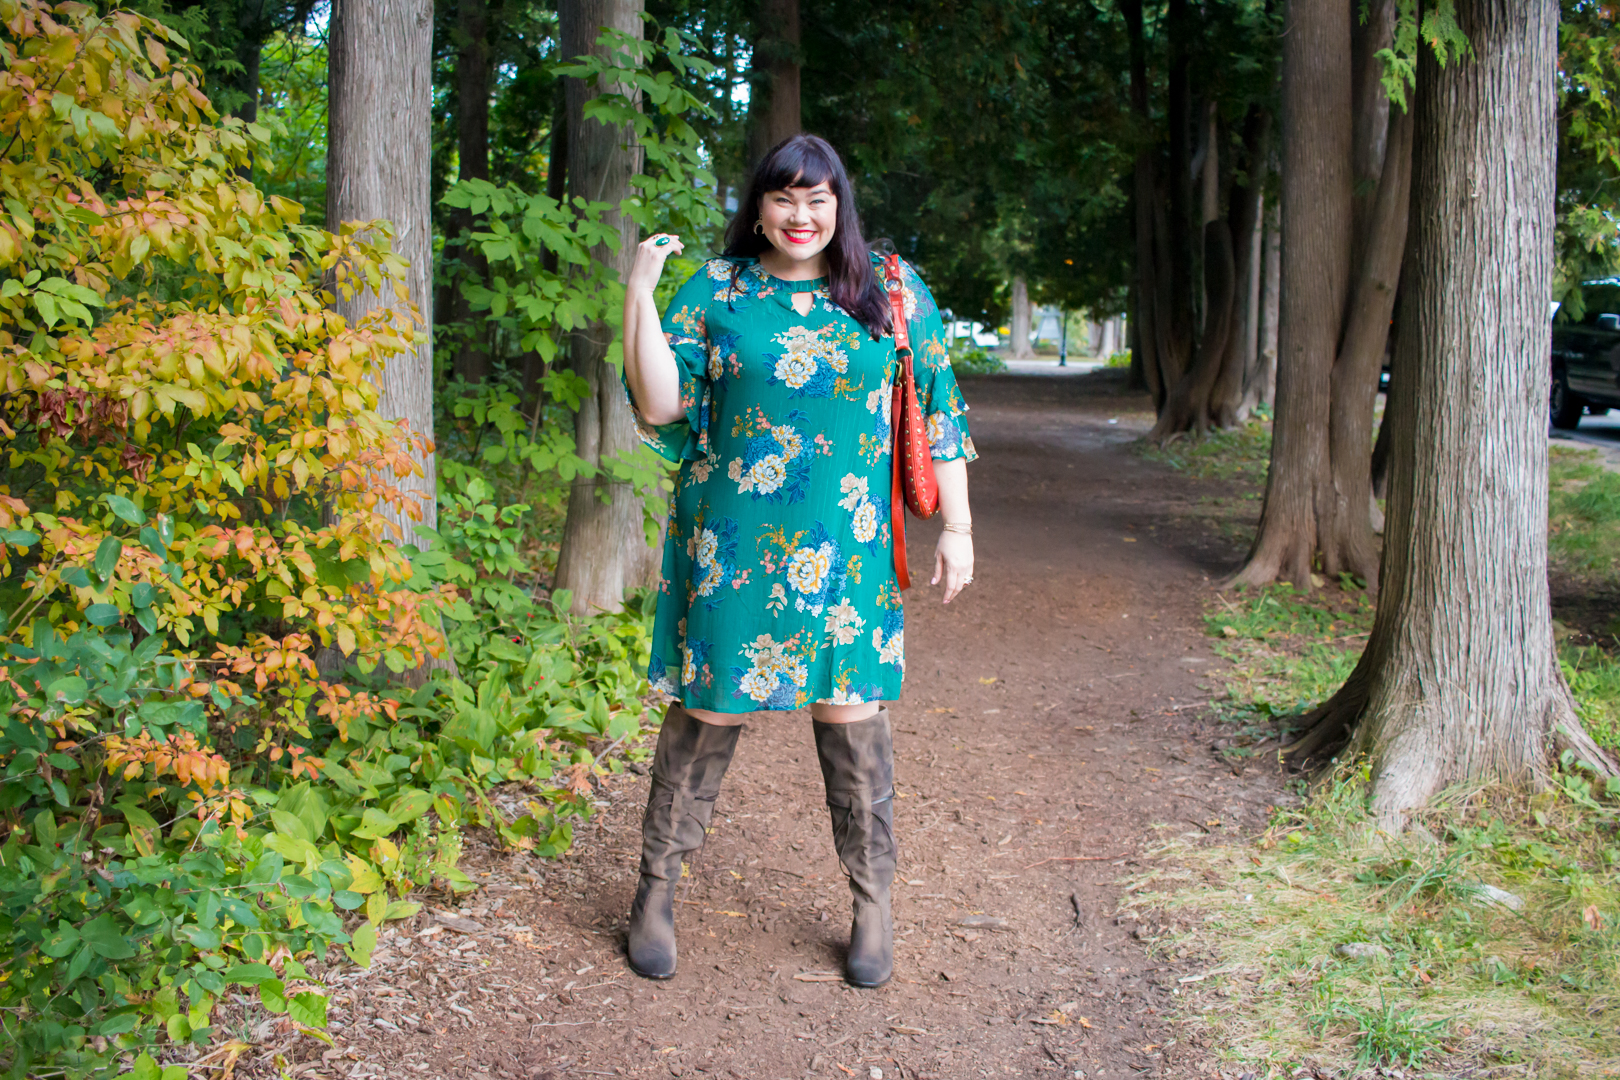 Avenue, Floral Dress, Plus Size OOTD, Fall Fashion, Plus Size Fashion Find, Plus Size Dress, Style Plus Curves, Chicago Blogger, Chicago Plus Size Blogger, Plus Size Blogger, Amber McCulloch